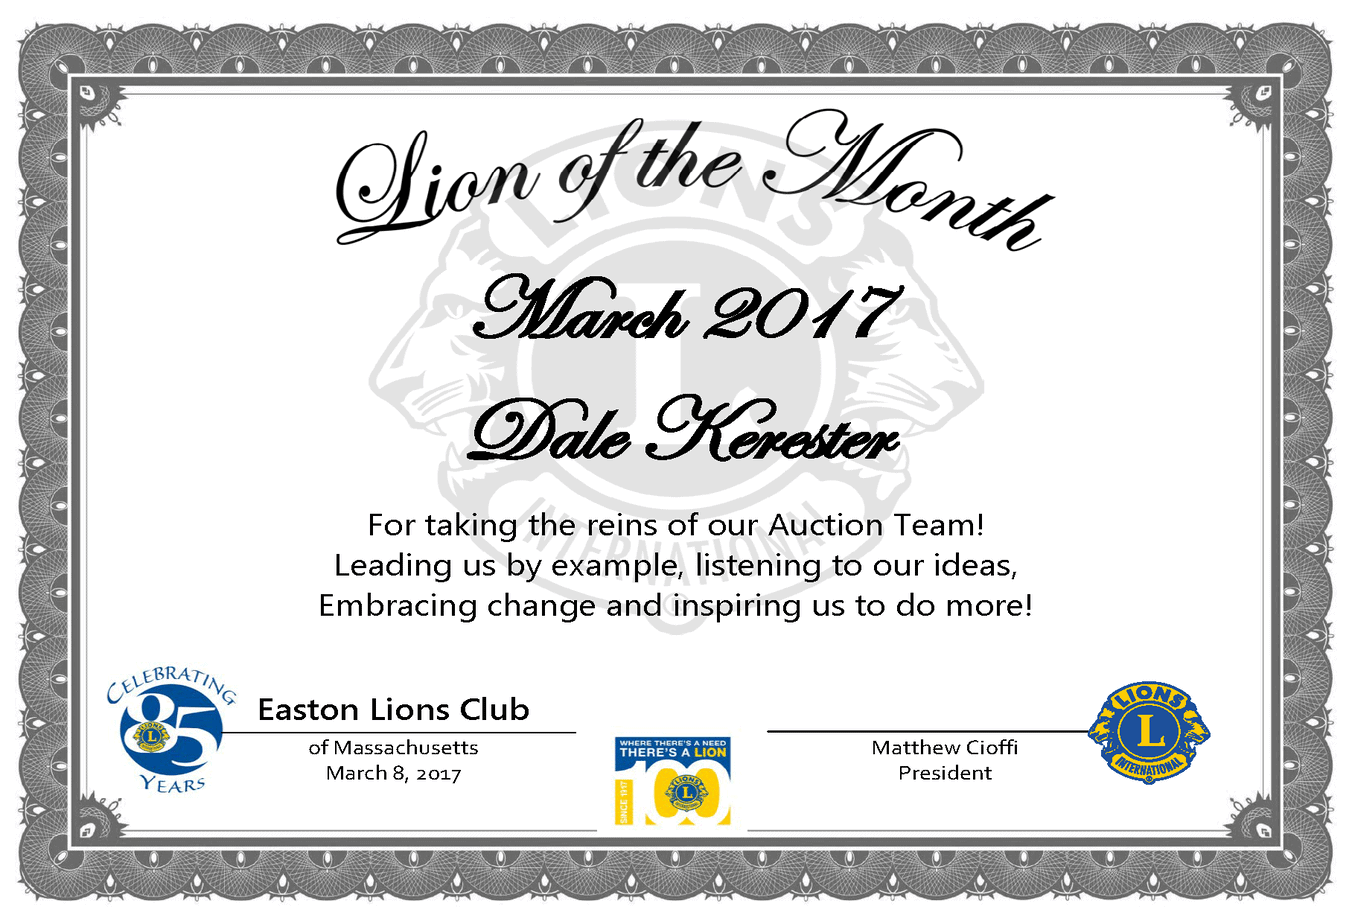 mar-2017-lion-of-the-month-in-memoriam-easton-lions-club